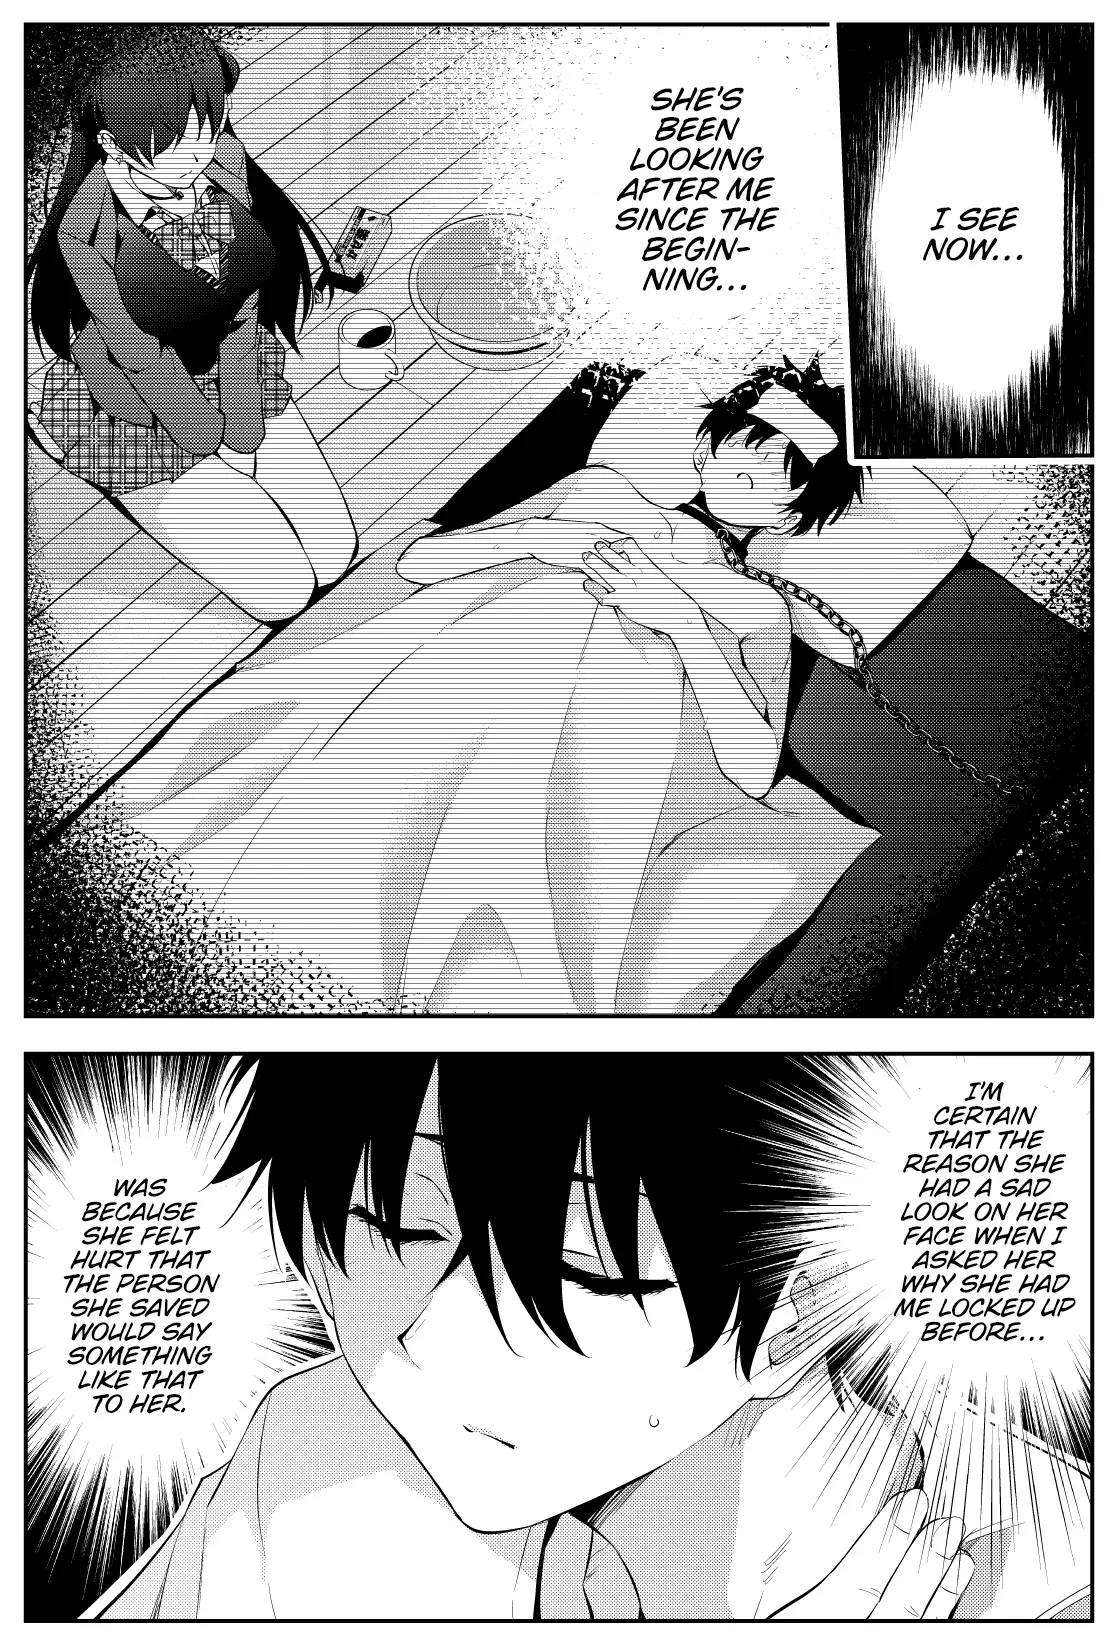 The Story Of A Manga Artist Confined By A Strange High School Girl - 47 page 5-f372b1e9